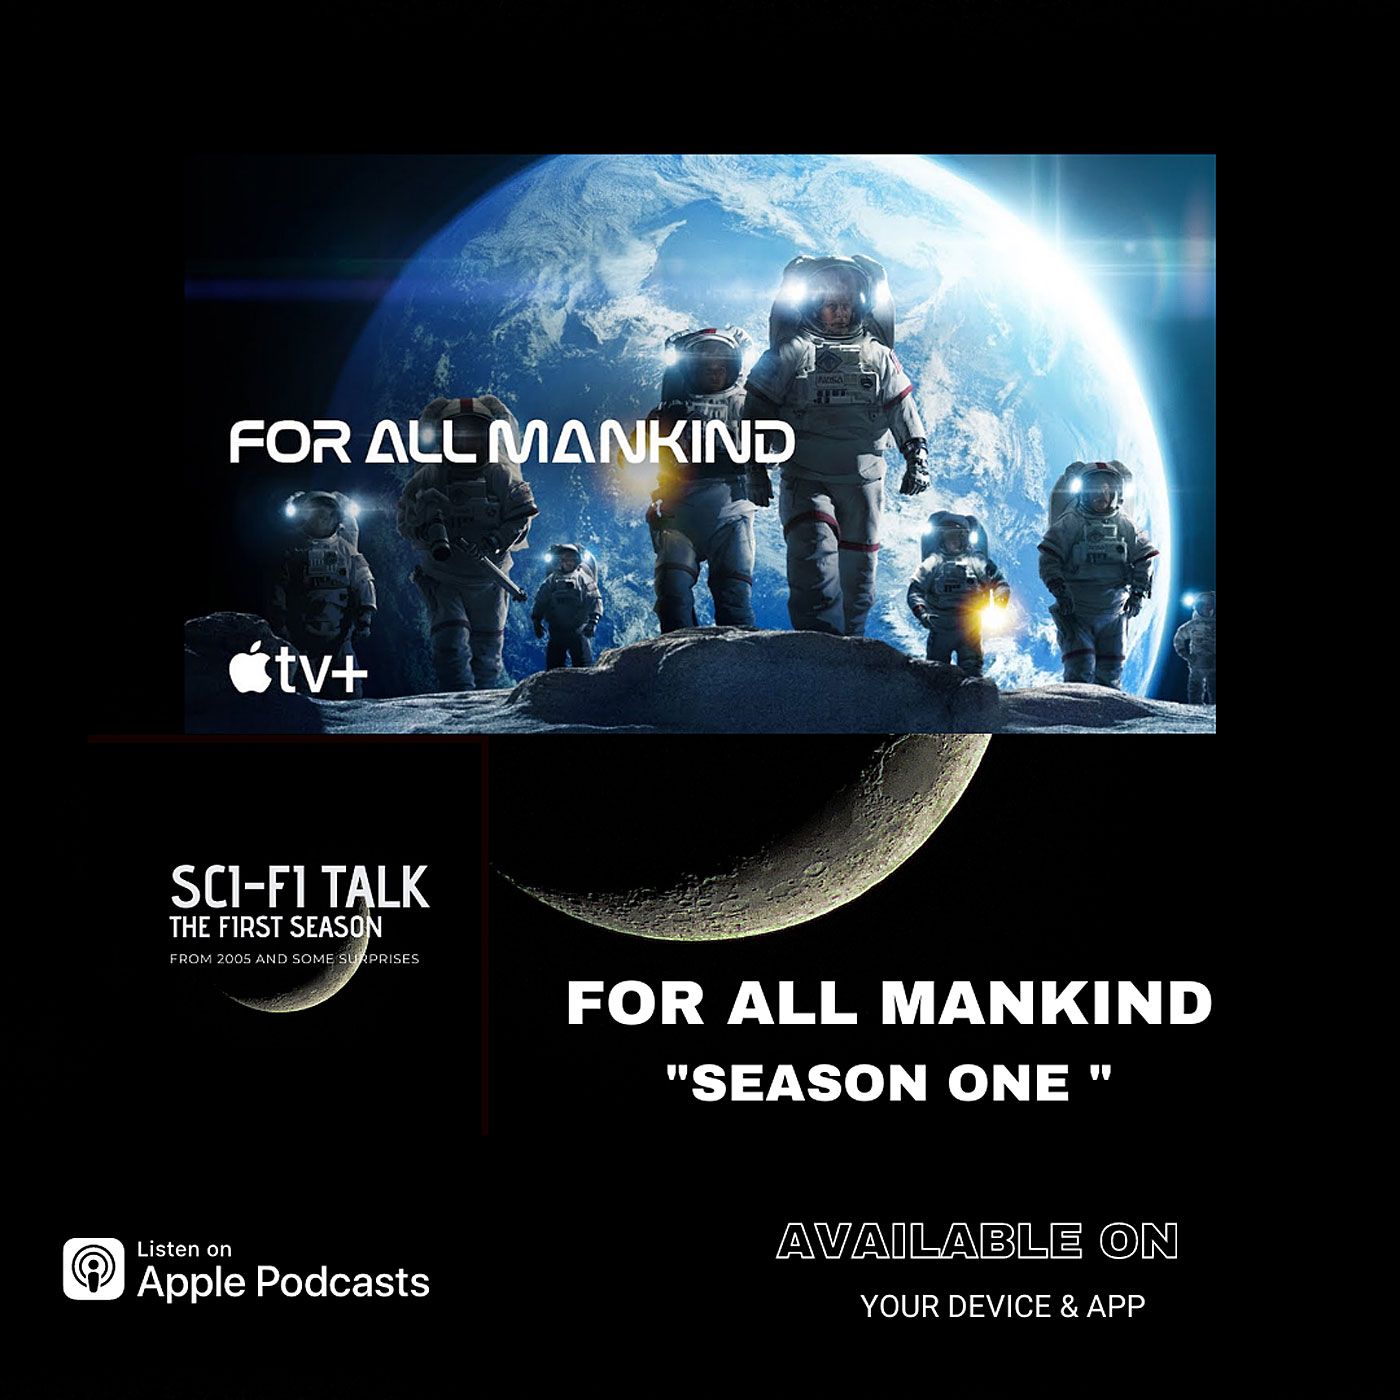 For All Mankind Season One